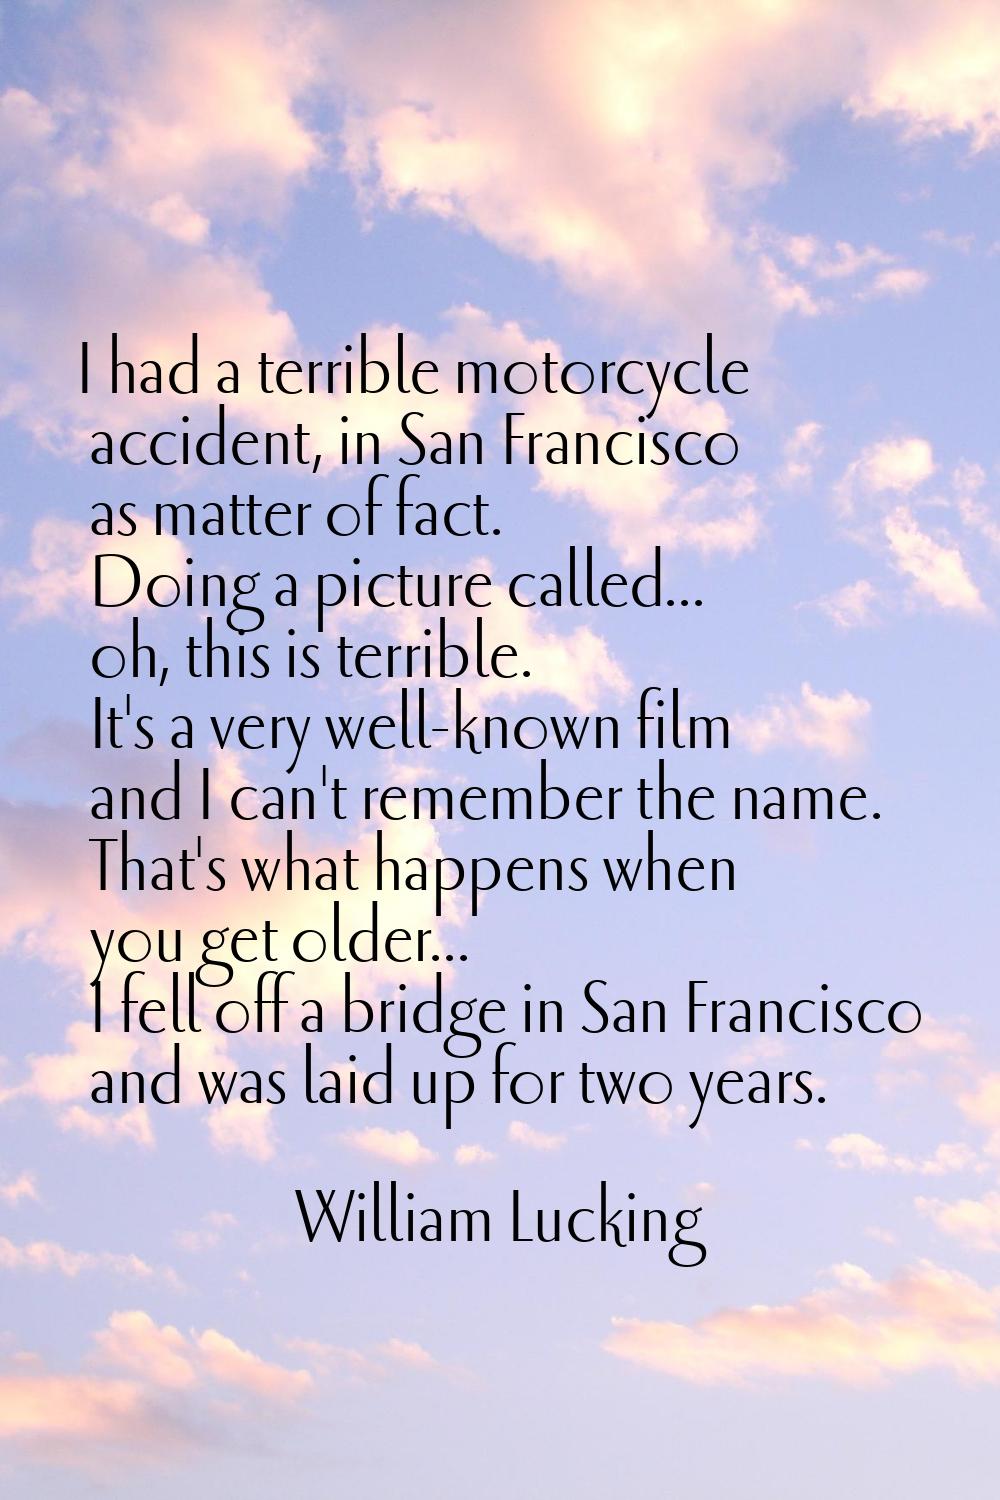 I had a terrible motorcycle accident, in San Francisco as matter of fact. Doing a picture called...